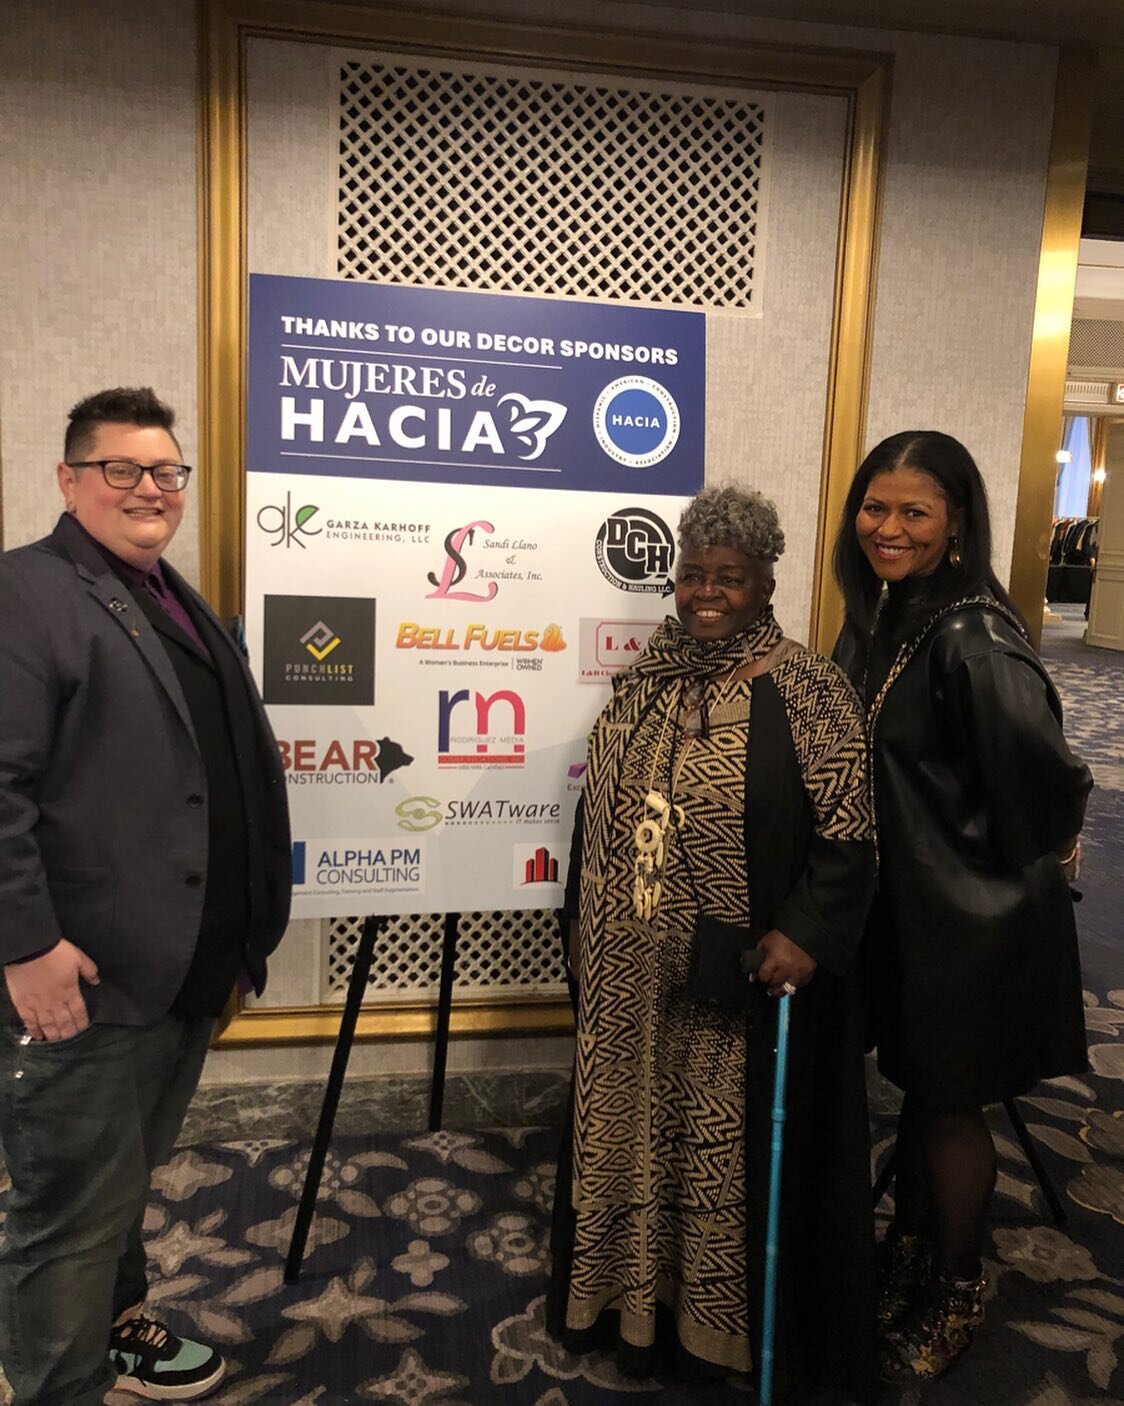 Exciting night celebrating @haciaworks with one of our favorites @fwcchicago #chicago #construction #hacia #haciaannualbanquet